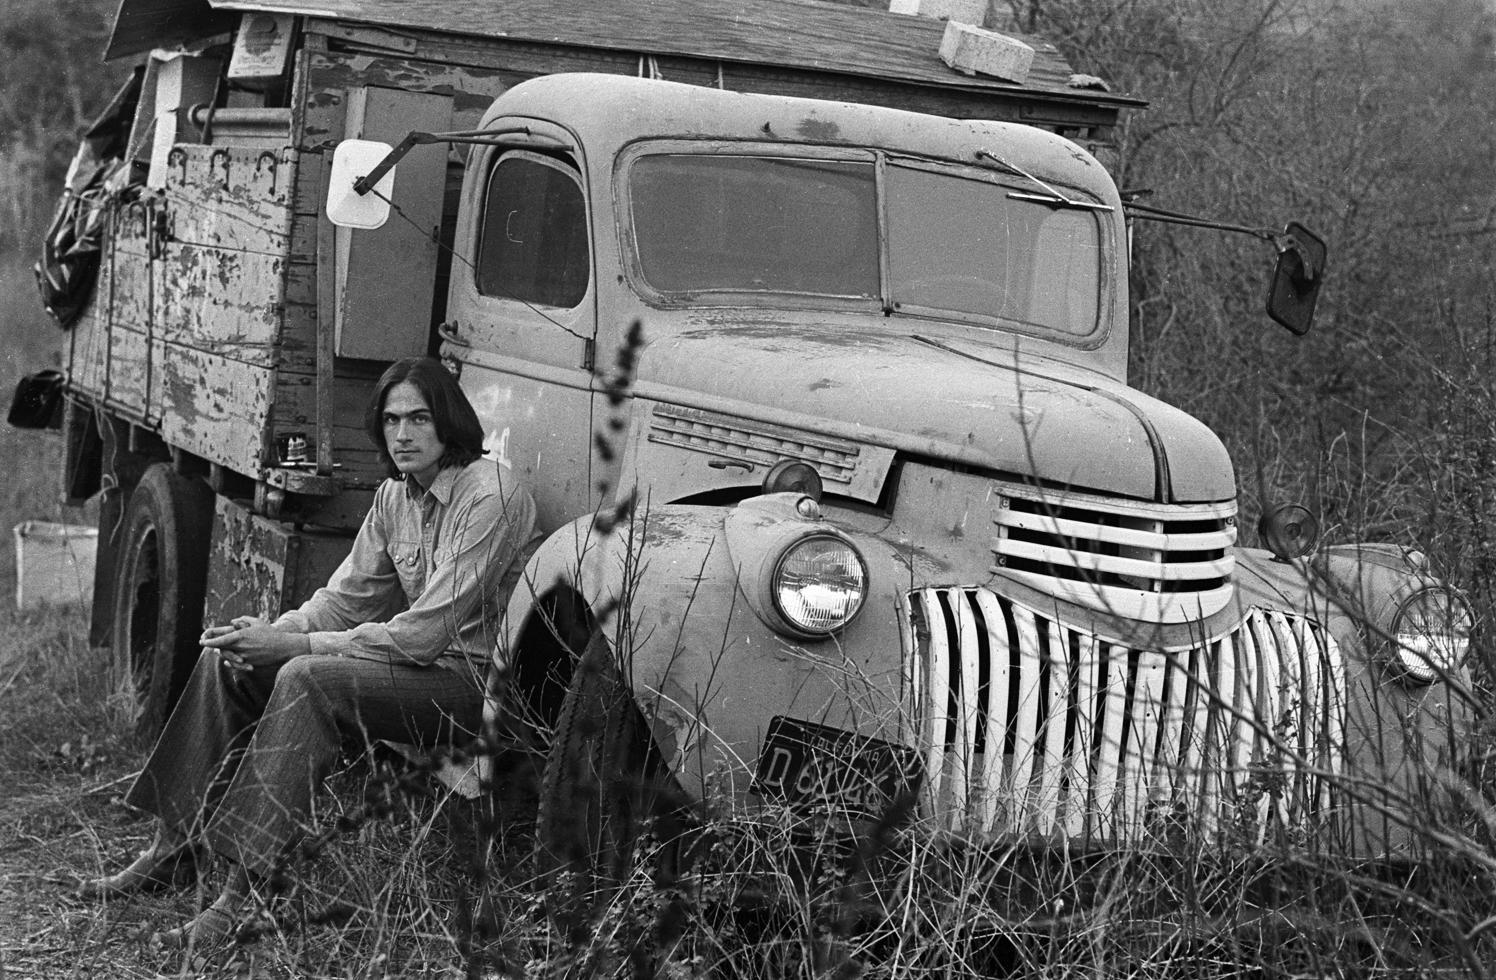 Henry Diltz Black and White Photograph - James Taylor and Old Truck, Lake Hollywood, CA 1969